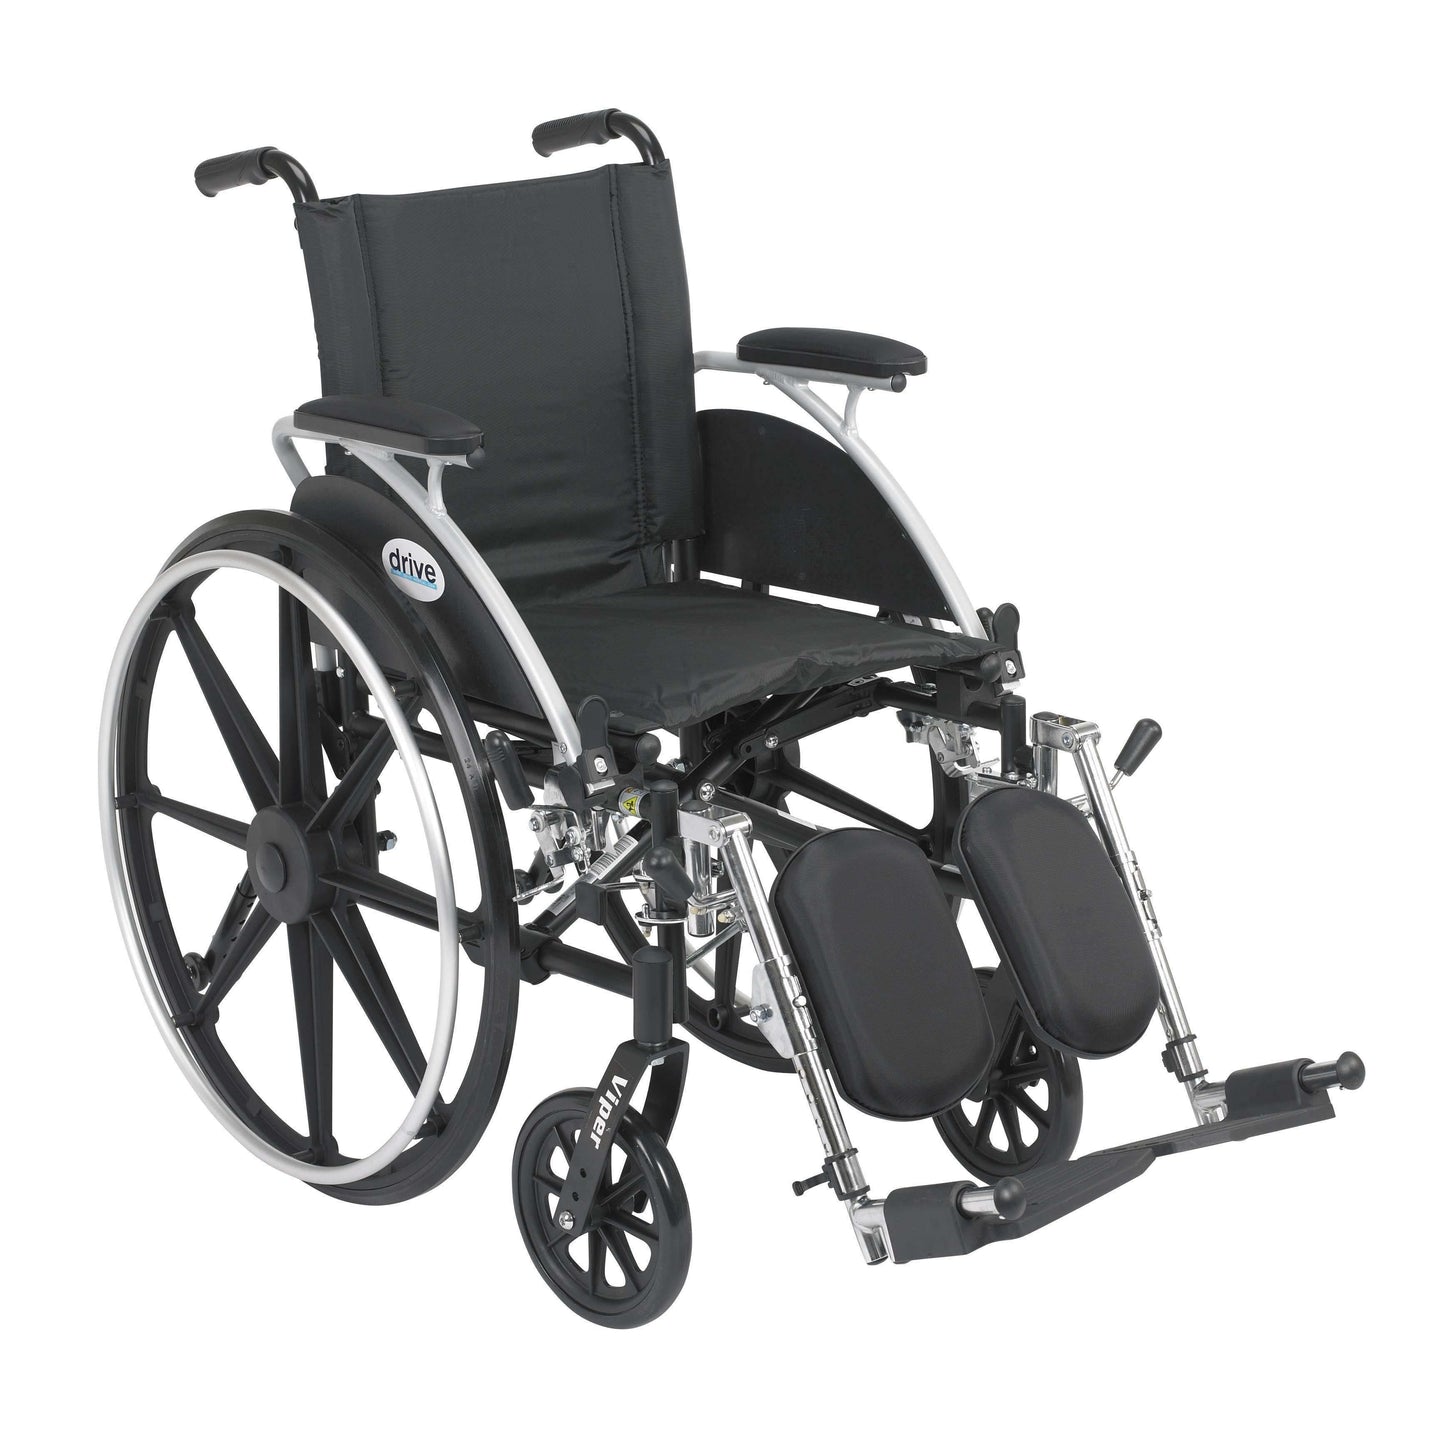 Drive l412dda-elr Viper Wheelchair with Flip Back Removable Arms, Desk Arms, Elevating Leg Rests, 12" Seat